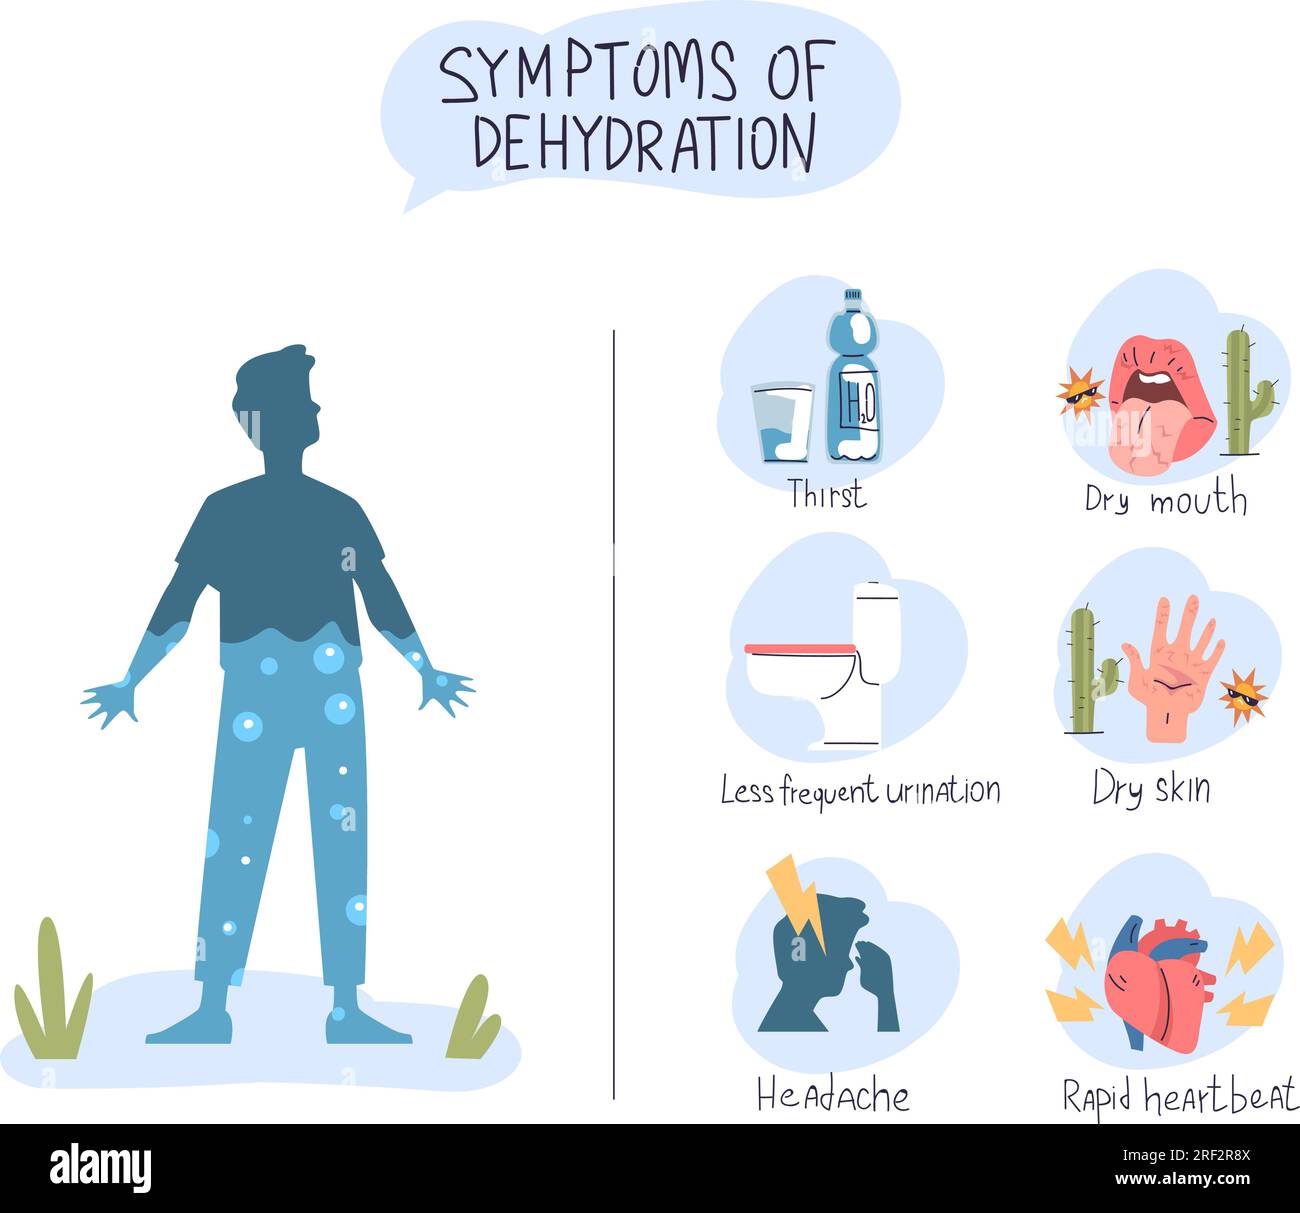 Dehydration symptoms. Dehydrated body dhydration symptom infographic, thirst sweat dry mouth in summer sun heatstroke hydrate disease medicine diagnosis, vector illustration of symptom human body Stock Vector